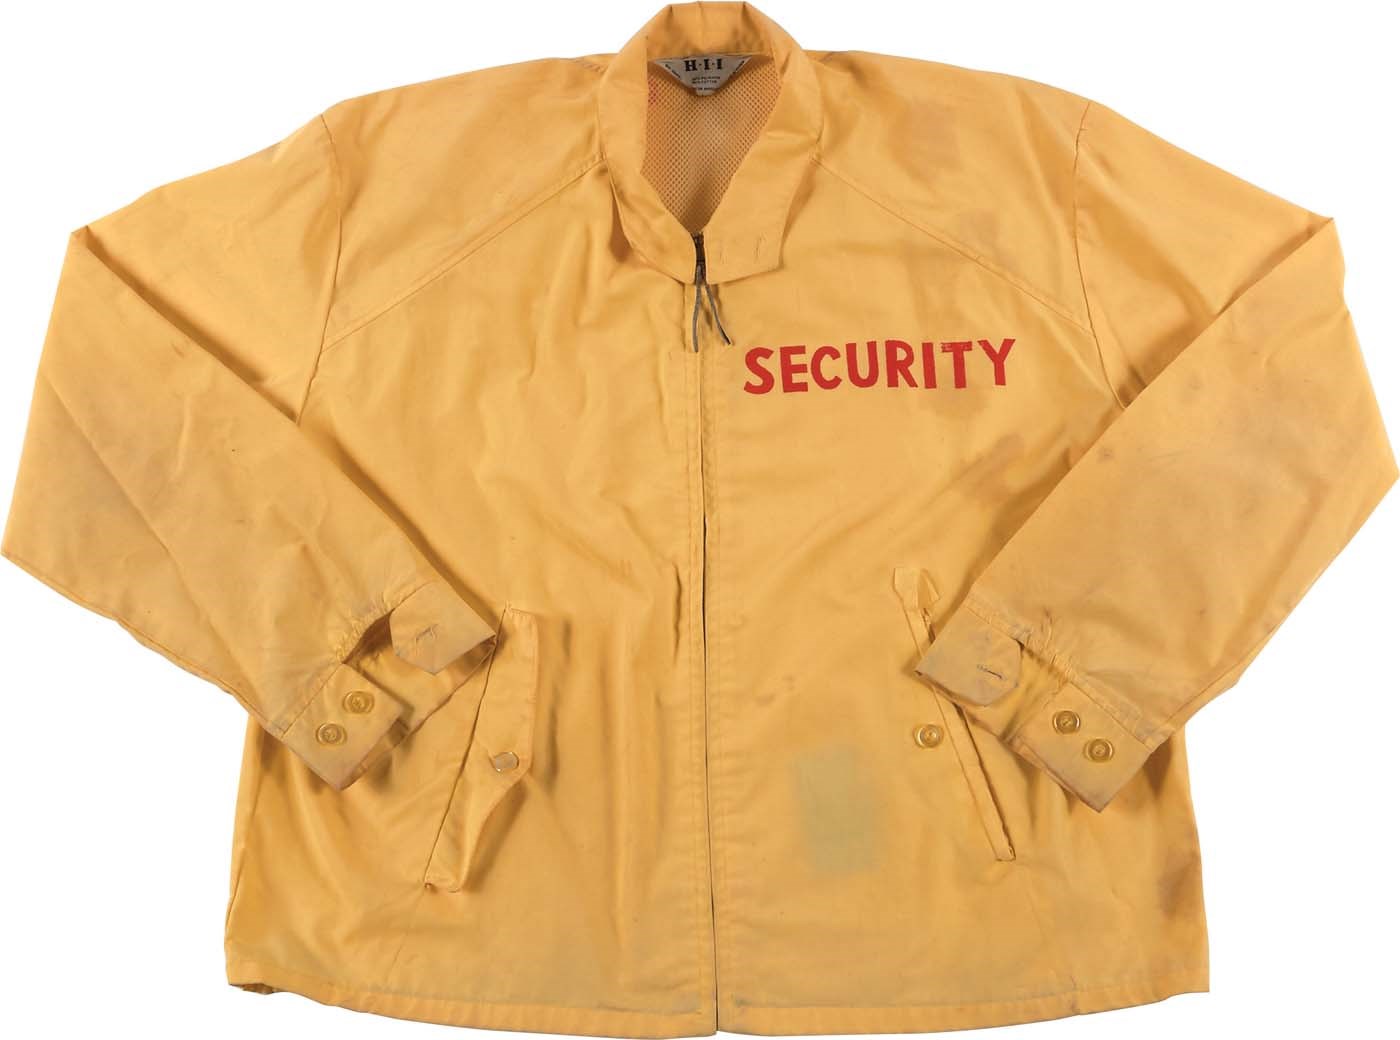 Rock 'N' Roll - 1969 Woodstock Security Jacket with Provenance